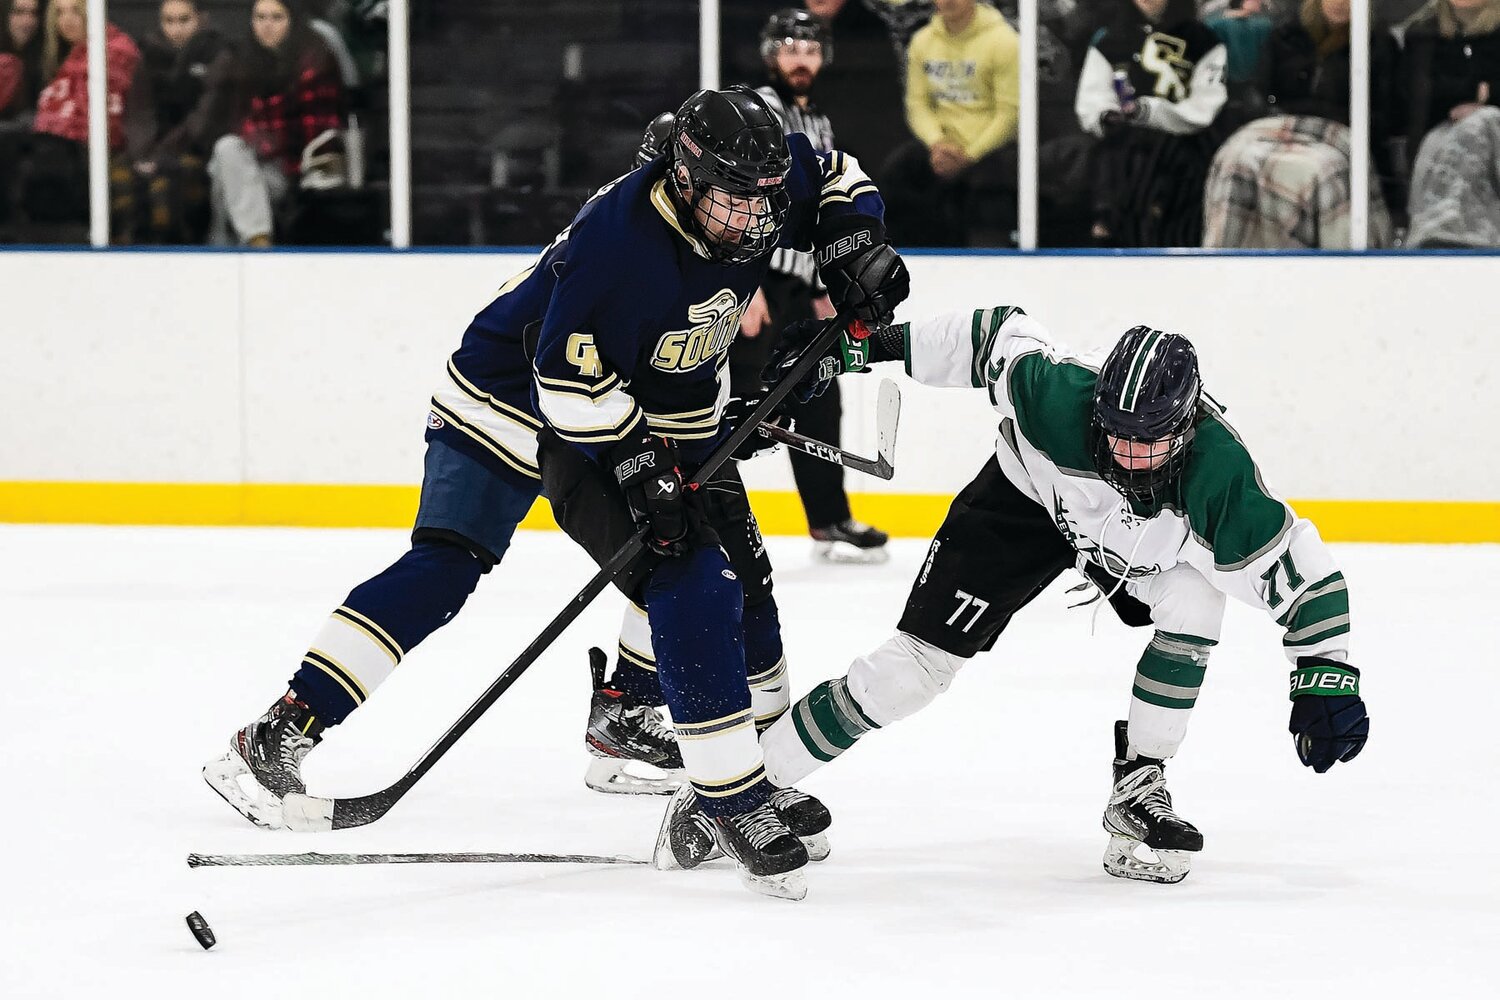 Pennridge’s Andrew Savona loses his stick while battling Council Rock South’s Kevin Koles for a loose puck in the third period.